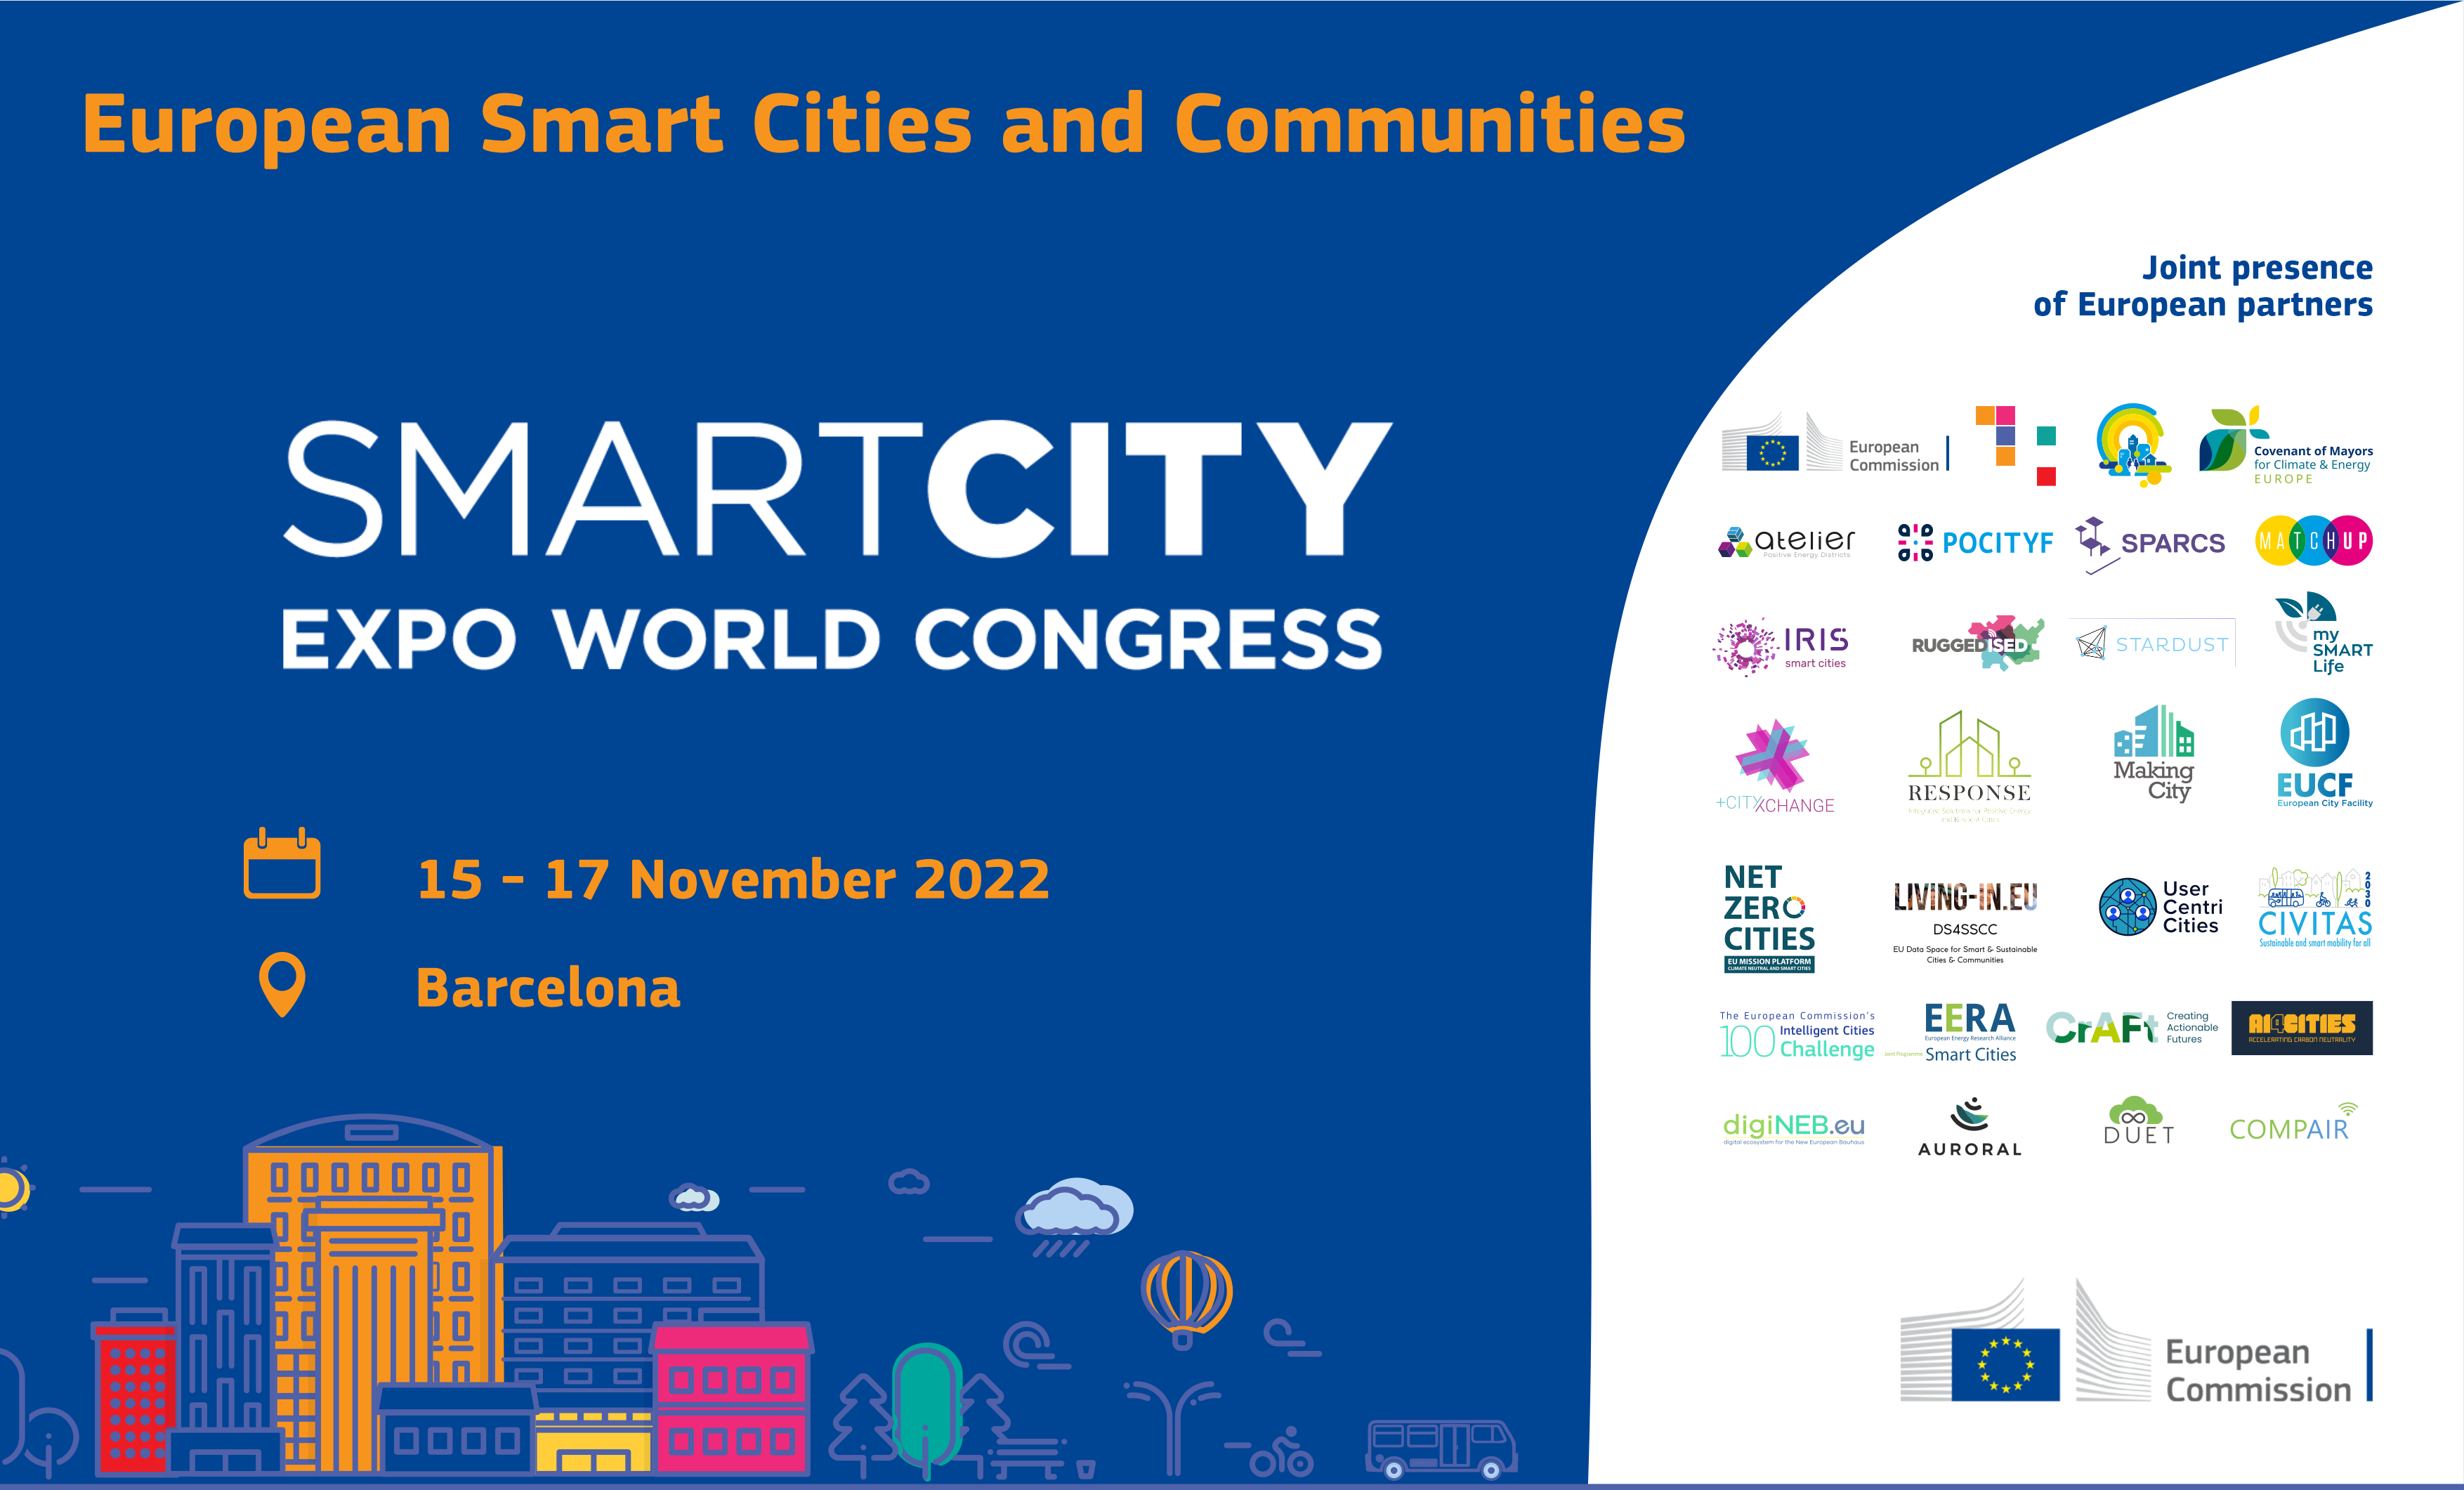 SPARCS joins European Smart Cities and Communities at Smart City Expo World Congress 2022